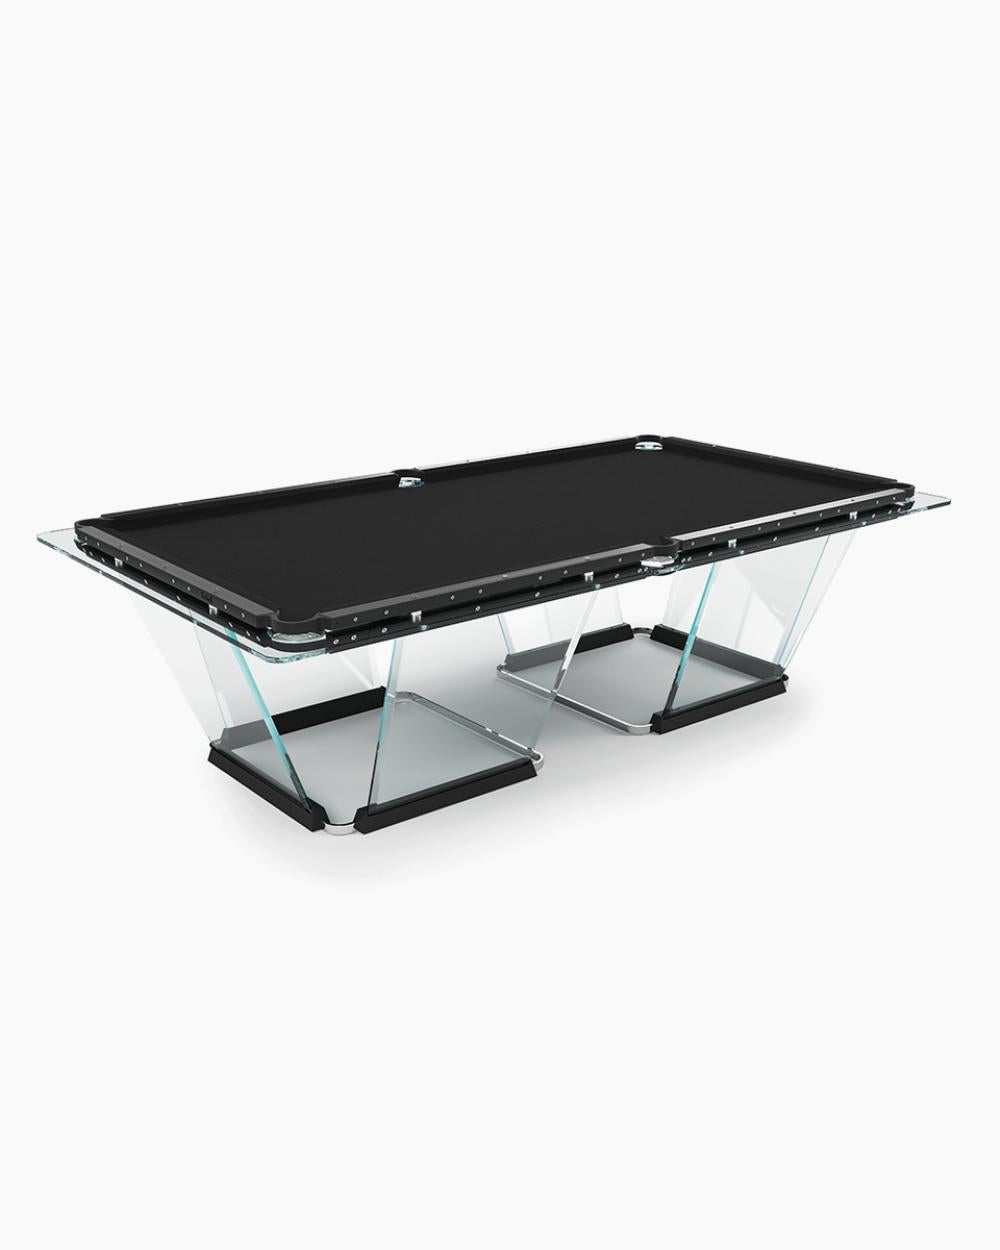 T1.1 Black pool table with black trim lures in both design aficionados and top players. The light dances across its handcrafted glass surfaces and glimmers when it strikes the black aluminum rails. The tempered glass playing field is at least 9/16”